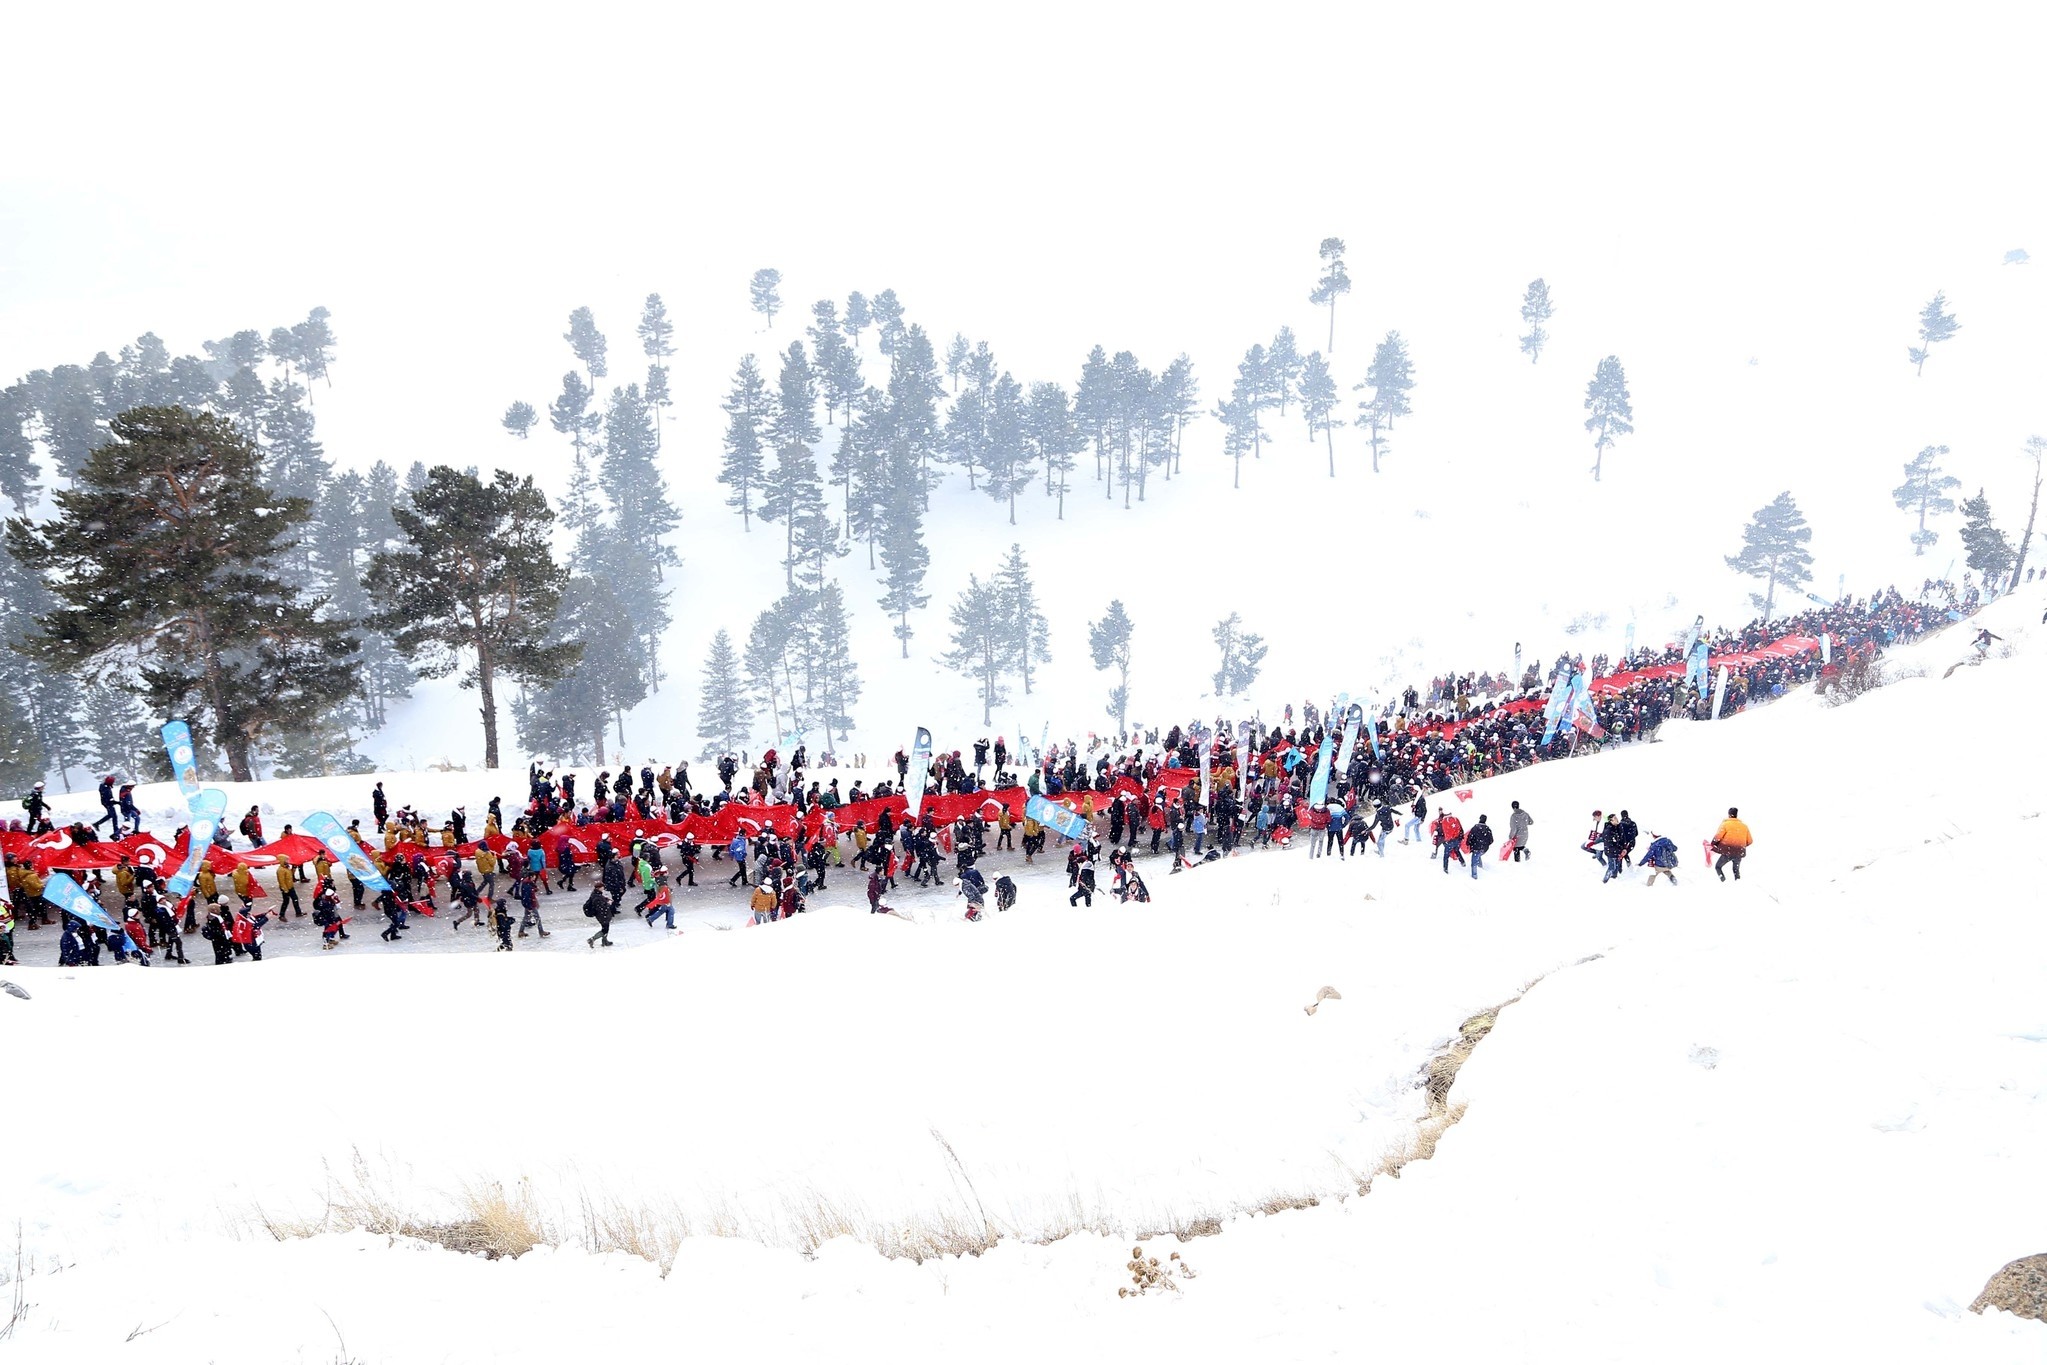 In freezing weather, thousands marched along the road lined with pine trees in Saru0131kamu0131u015f.